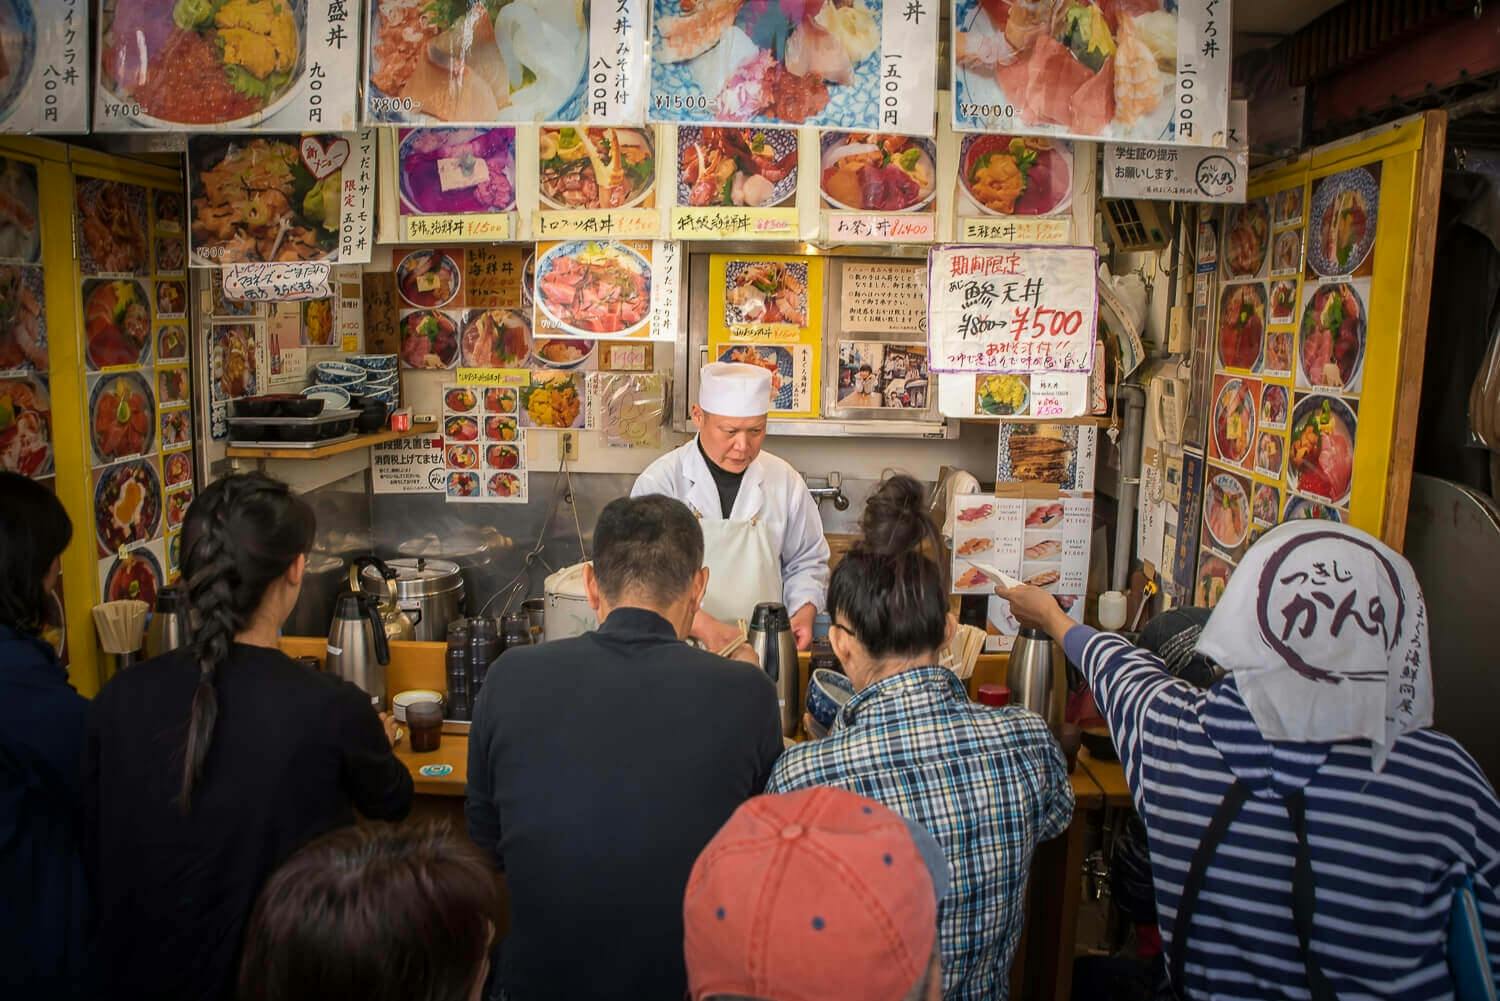 Morning guided tour of Tsukiji fish market with breakfast